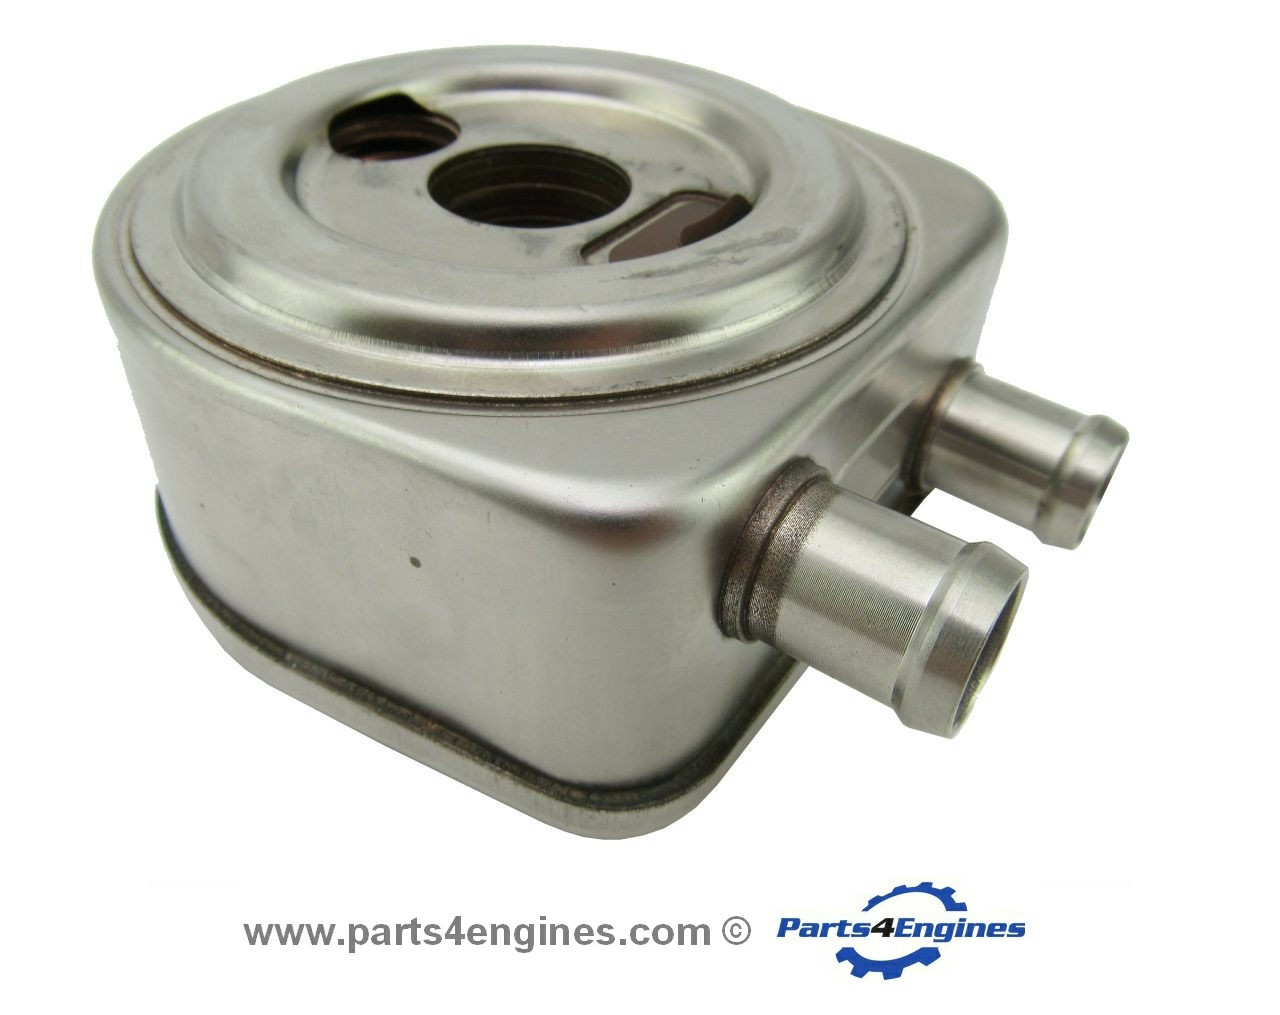 Perkins 700 series & M85T Oil cooler, from parts4engines.com